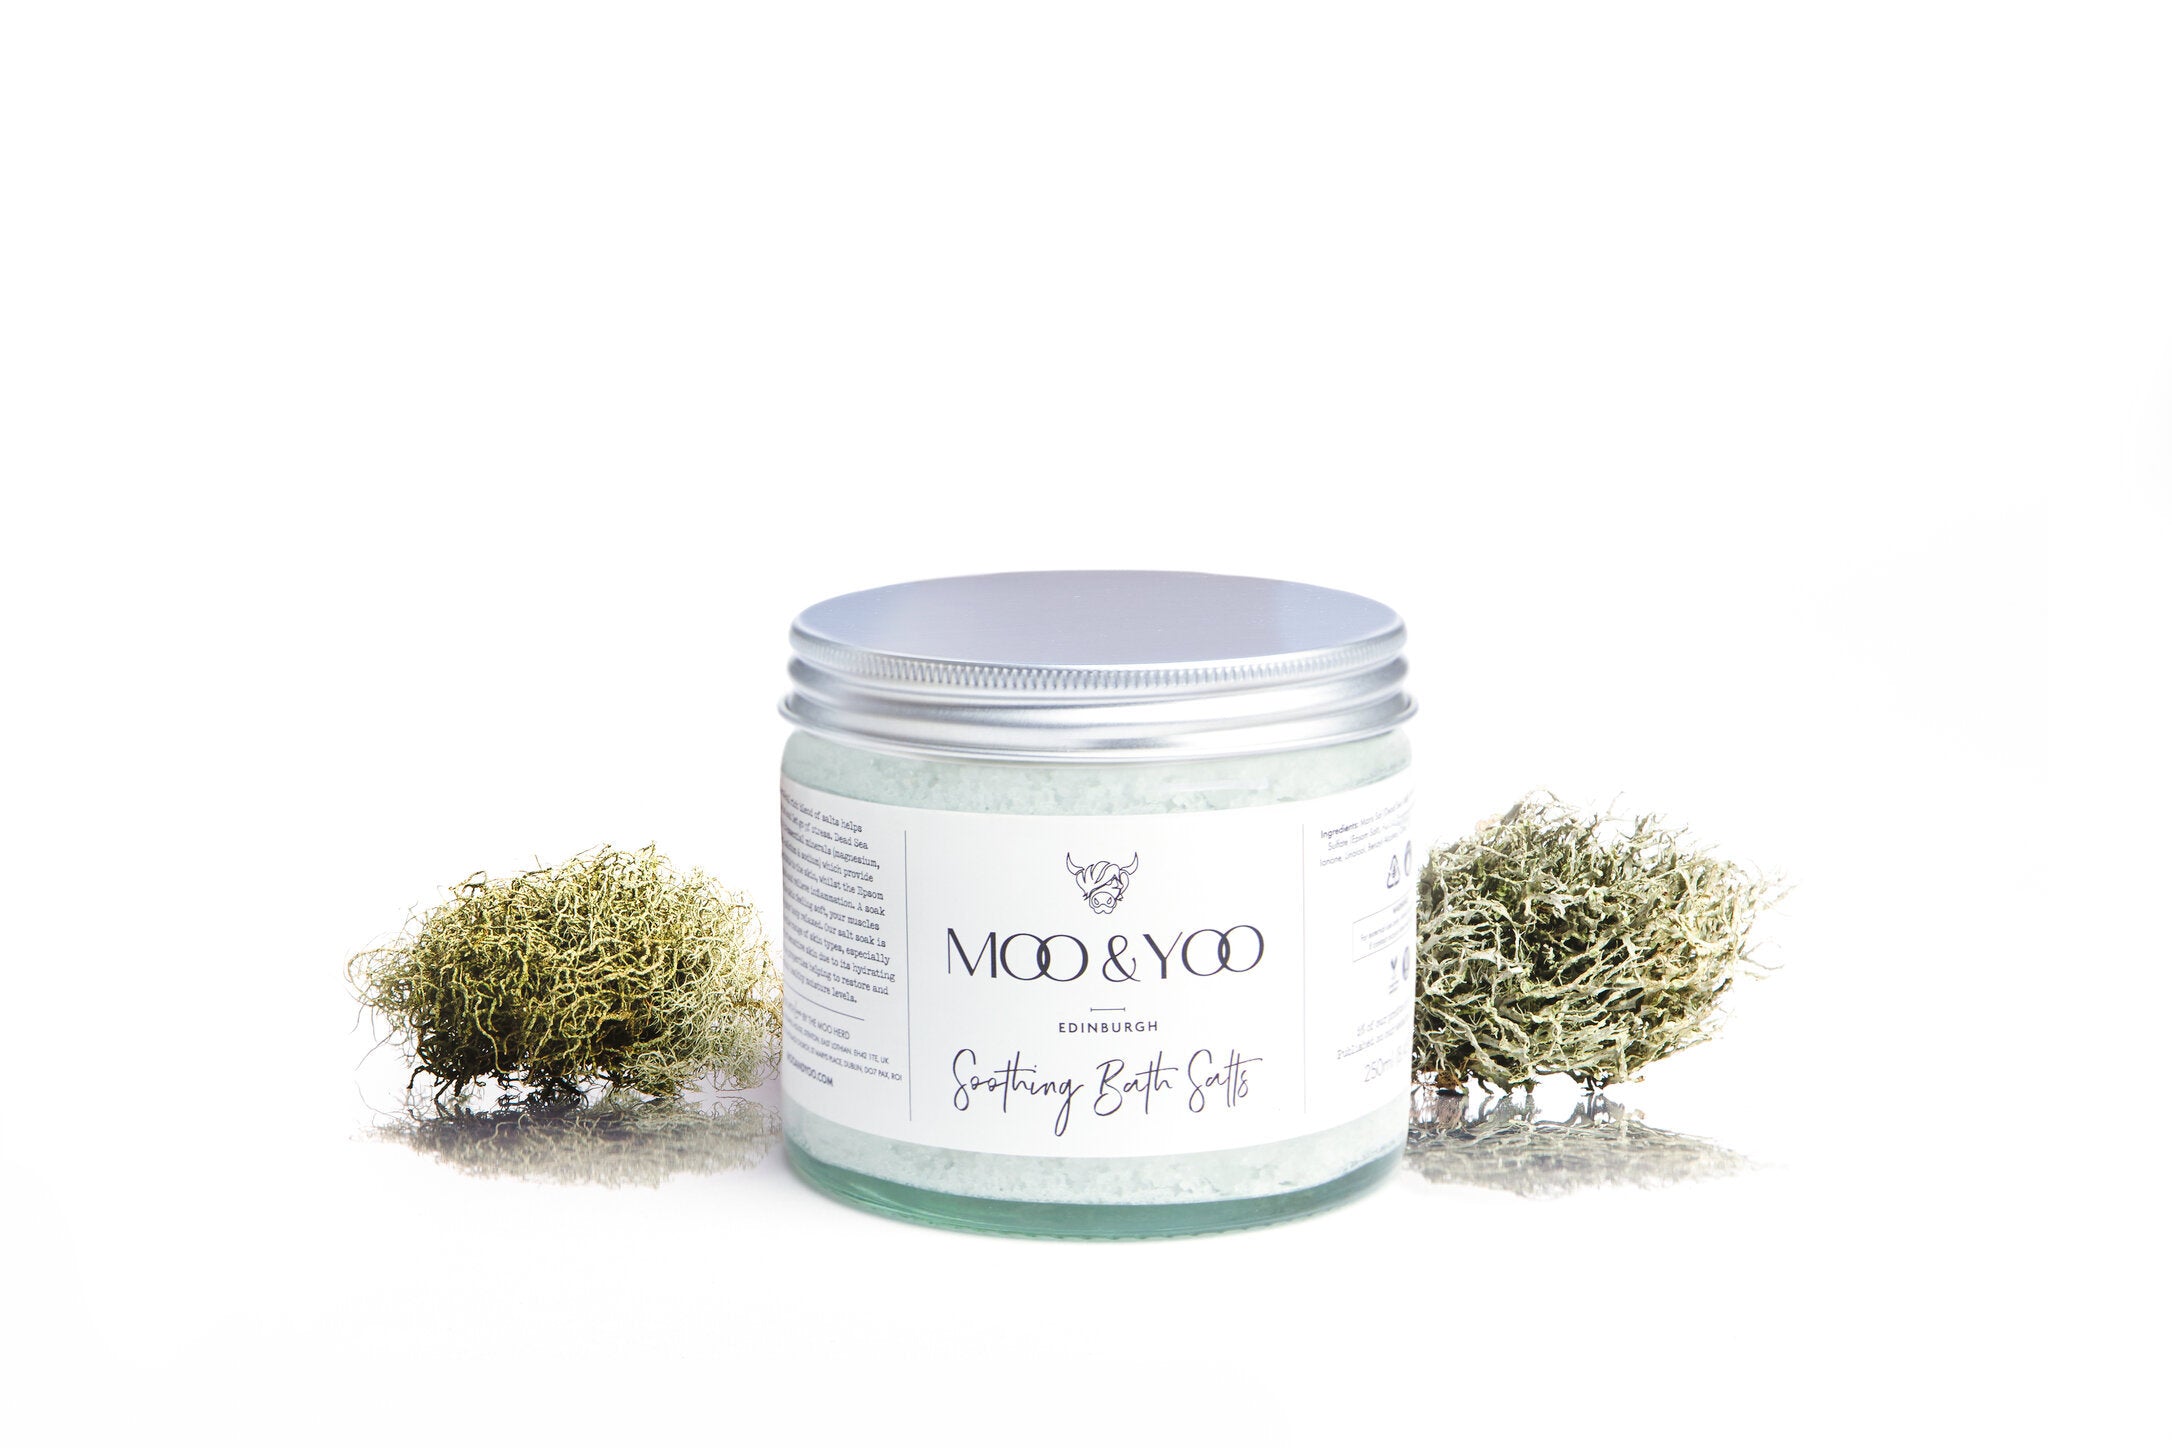 Image of Moo and Yoo Soothing Bath Salts on a plain white background with a spring of Icelandic Moss on each side.